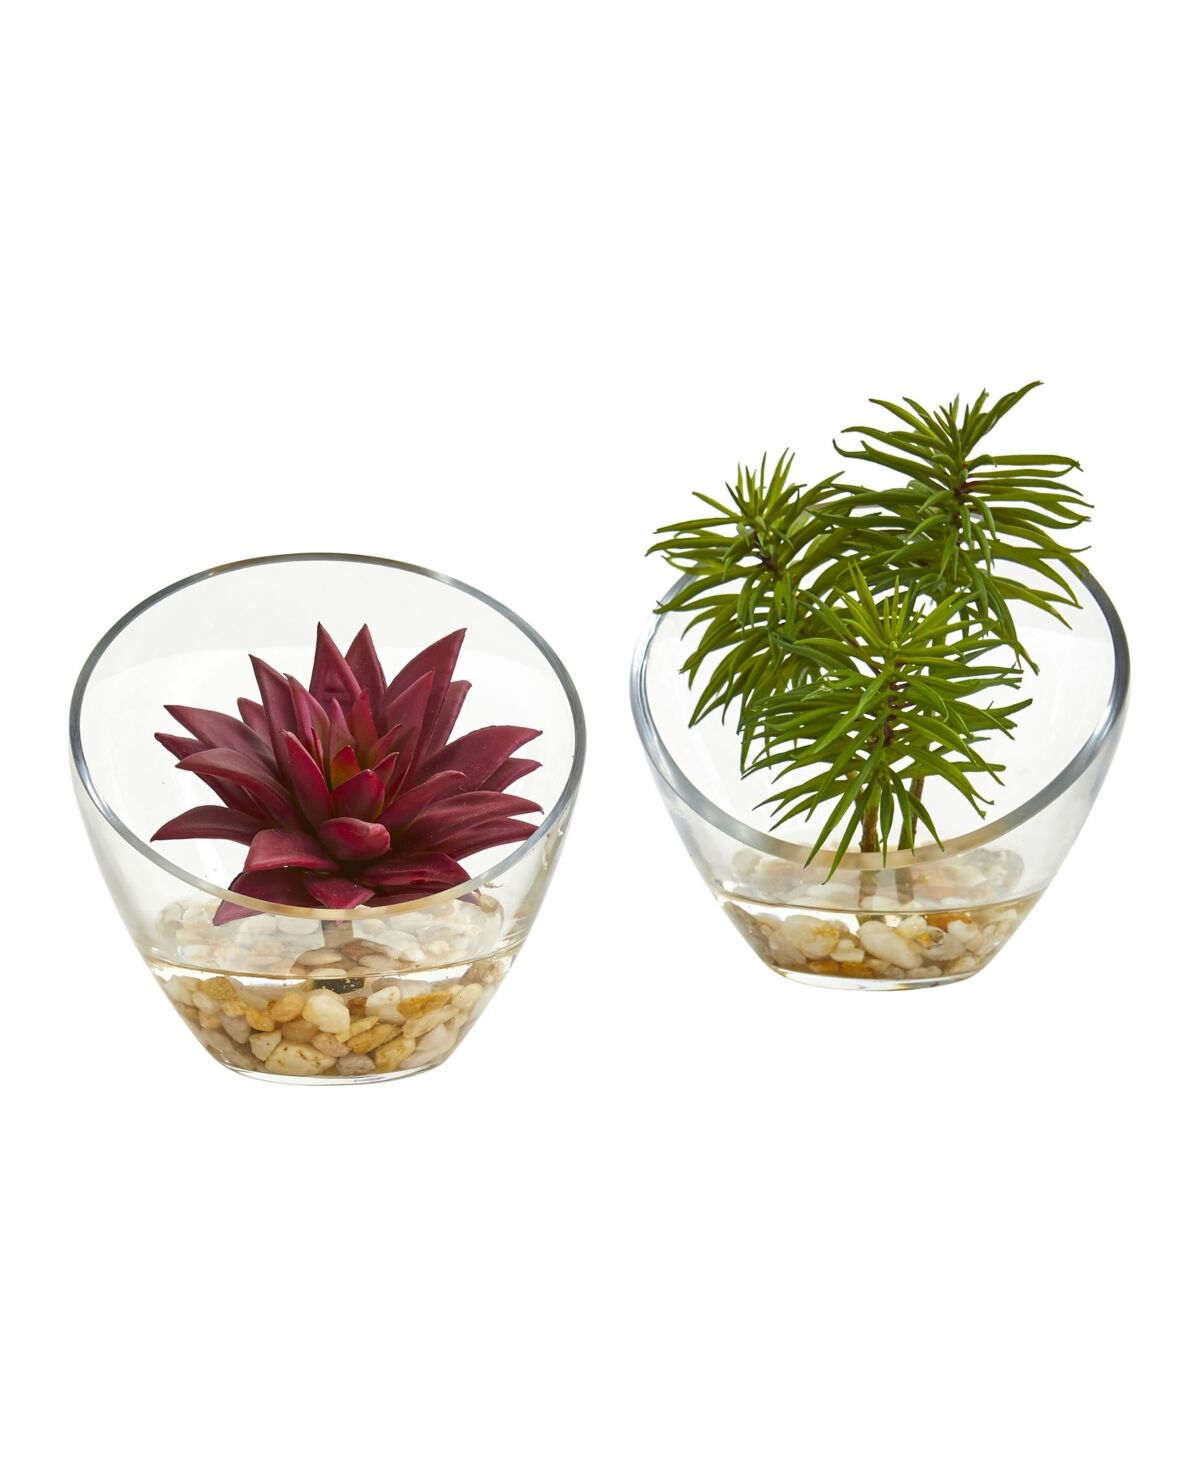 Nearly Natural Succulent Artificial Plant in Slanted Glass Vase (Set of 2) - Burgundy/Green